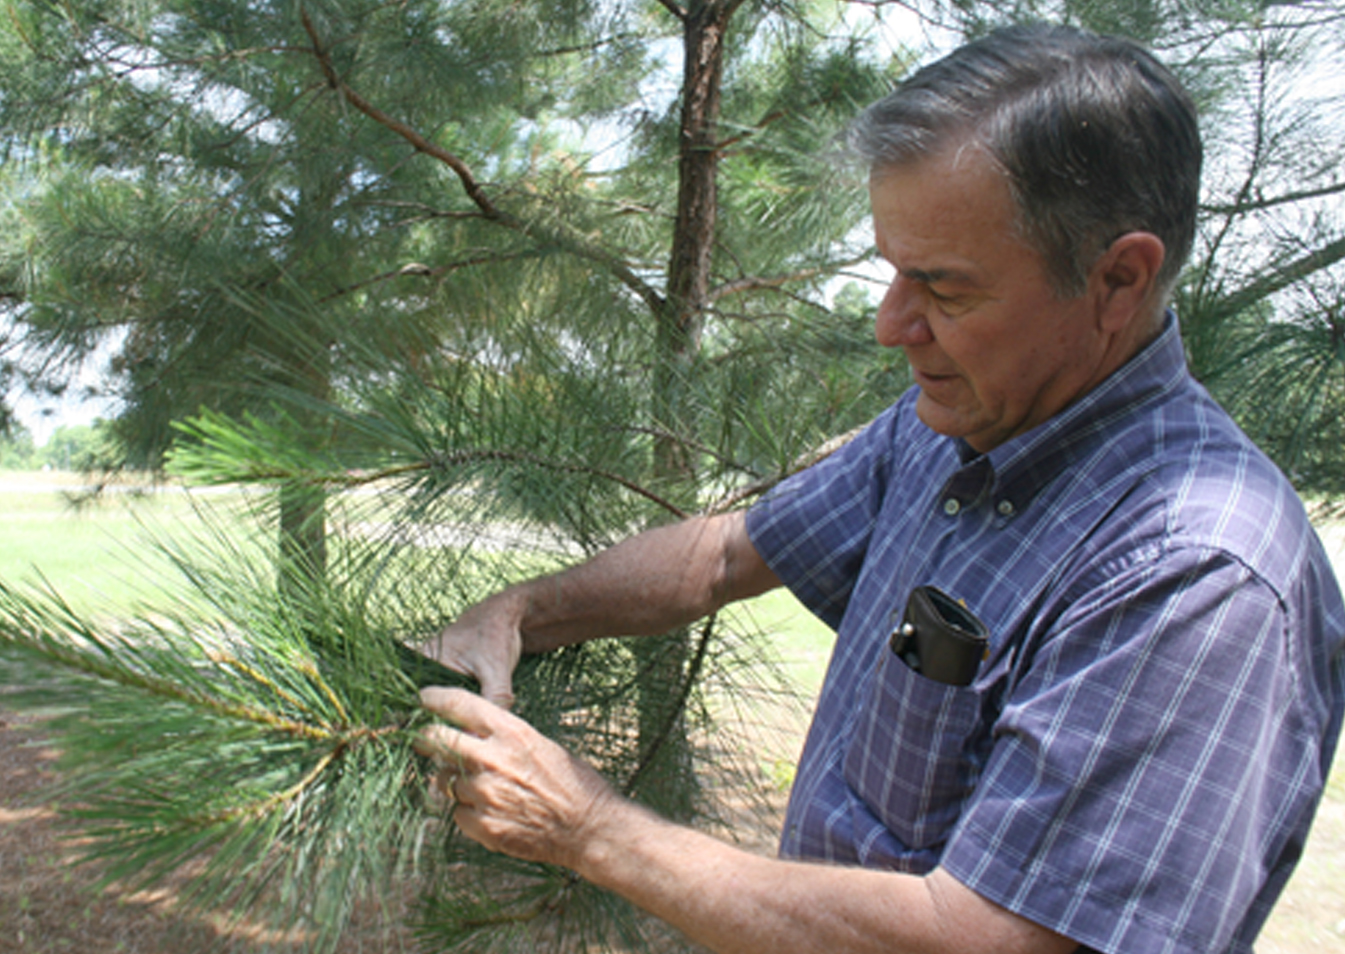 Wayne Hanna, a scientist on the UGA Tifton Campus, examines a pine tree located in Tifton.